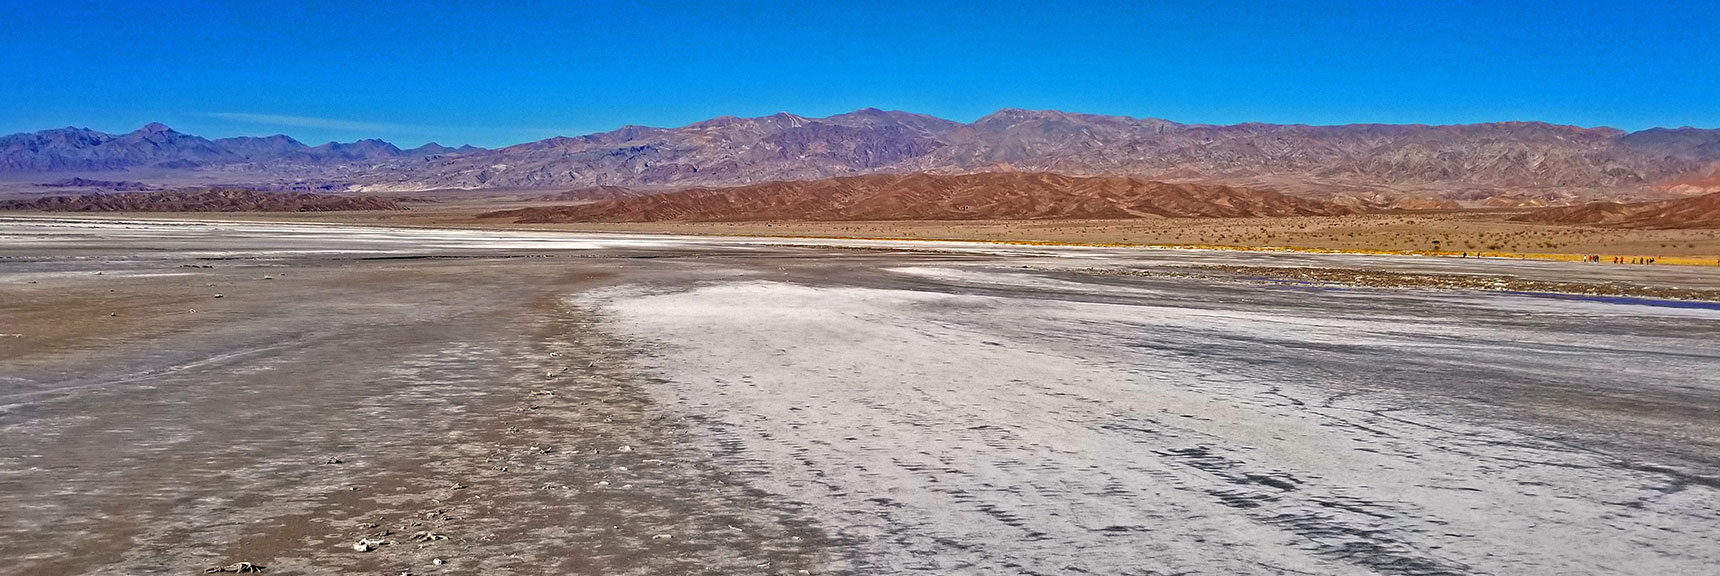 The Various Colors in the Landscape Stand Out Brilliantly in the Sunlight. | Return of Lake Manly (Lake in Death Valley) | Death Valley National Park, California